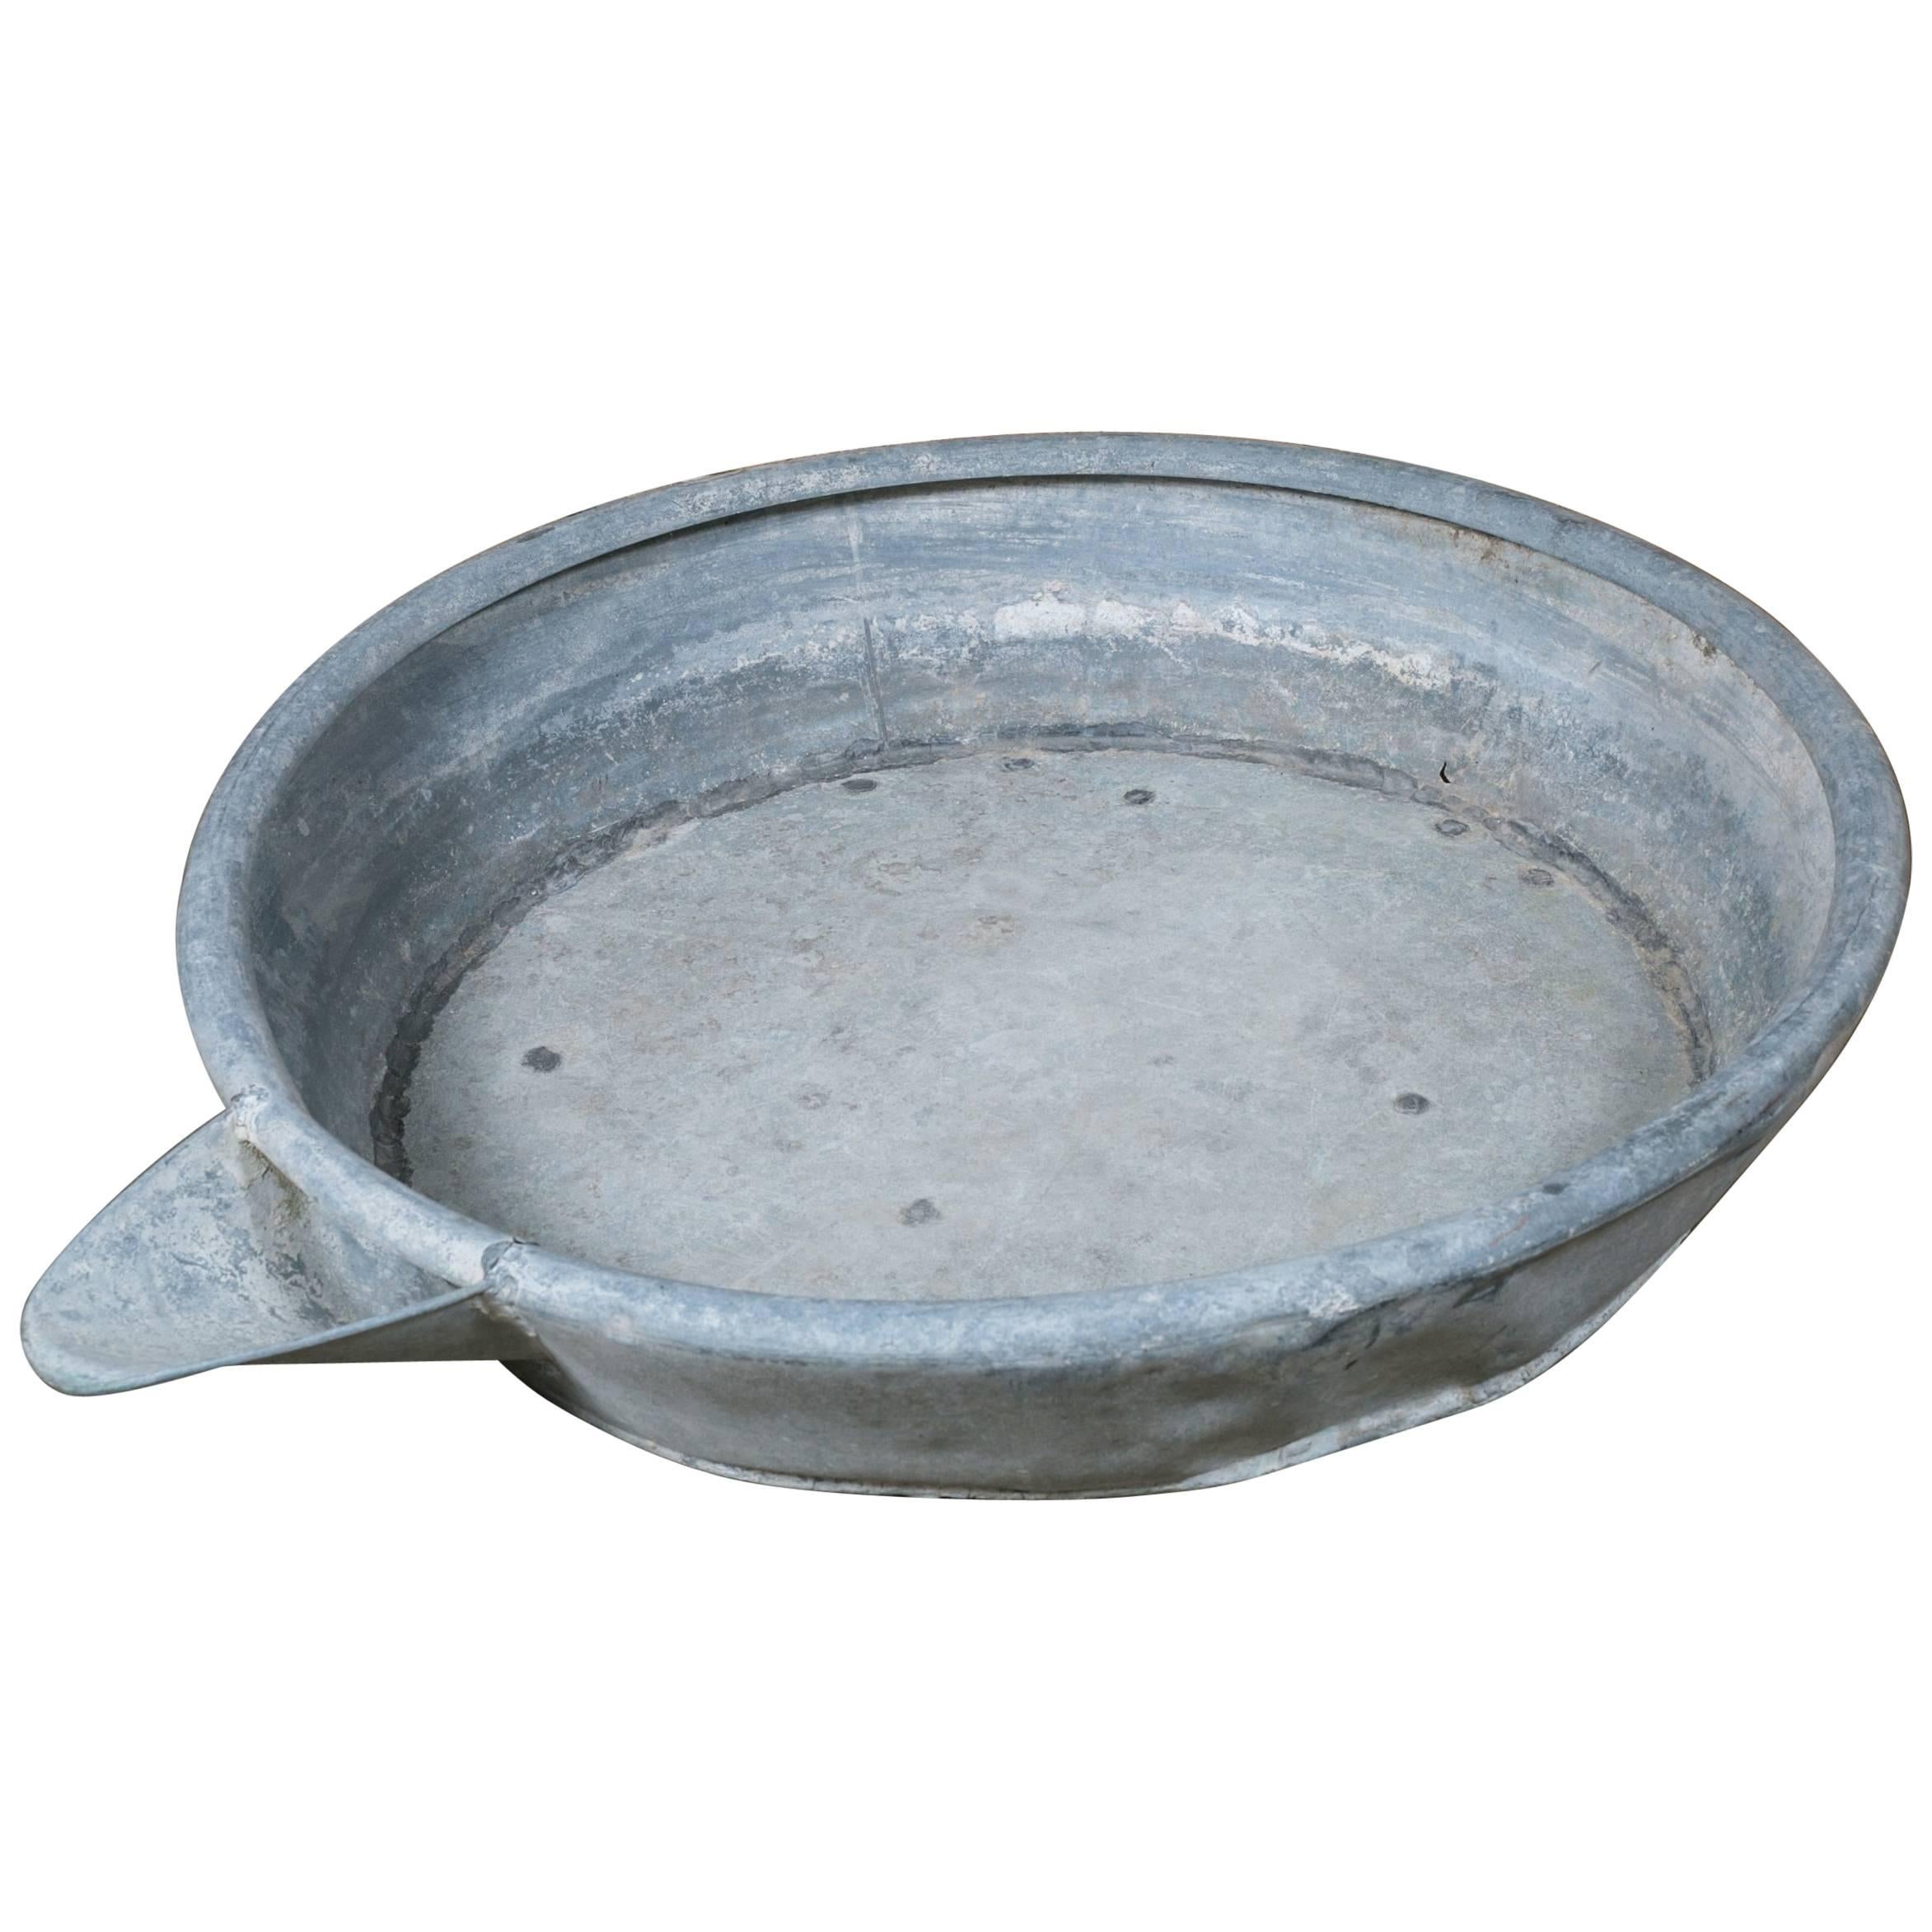 Over-Sized Industrial Zinc Bowl with Spout